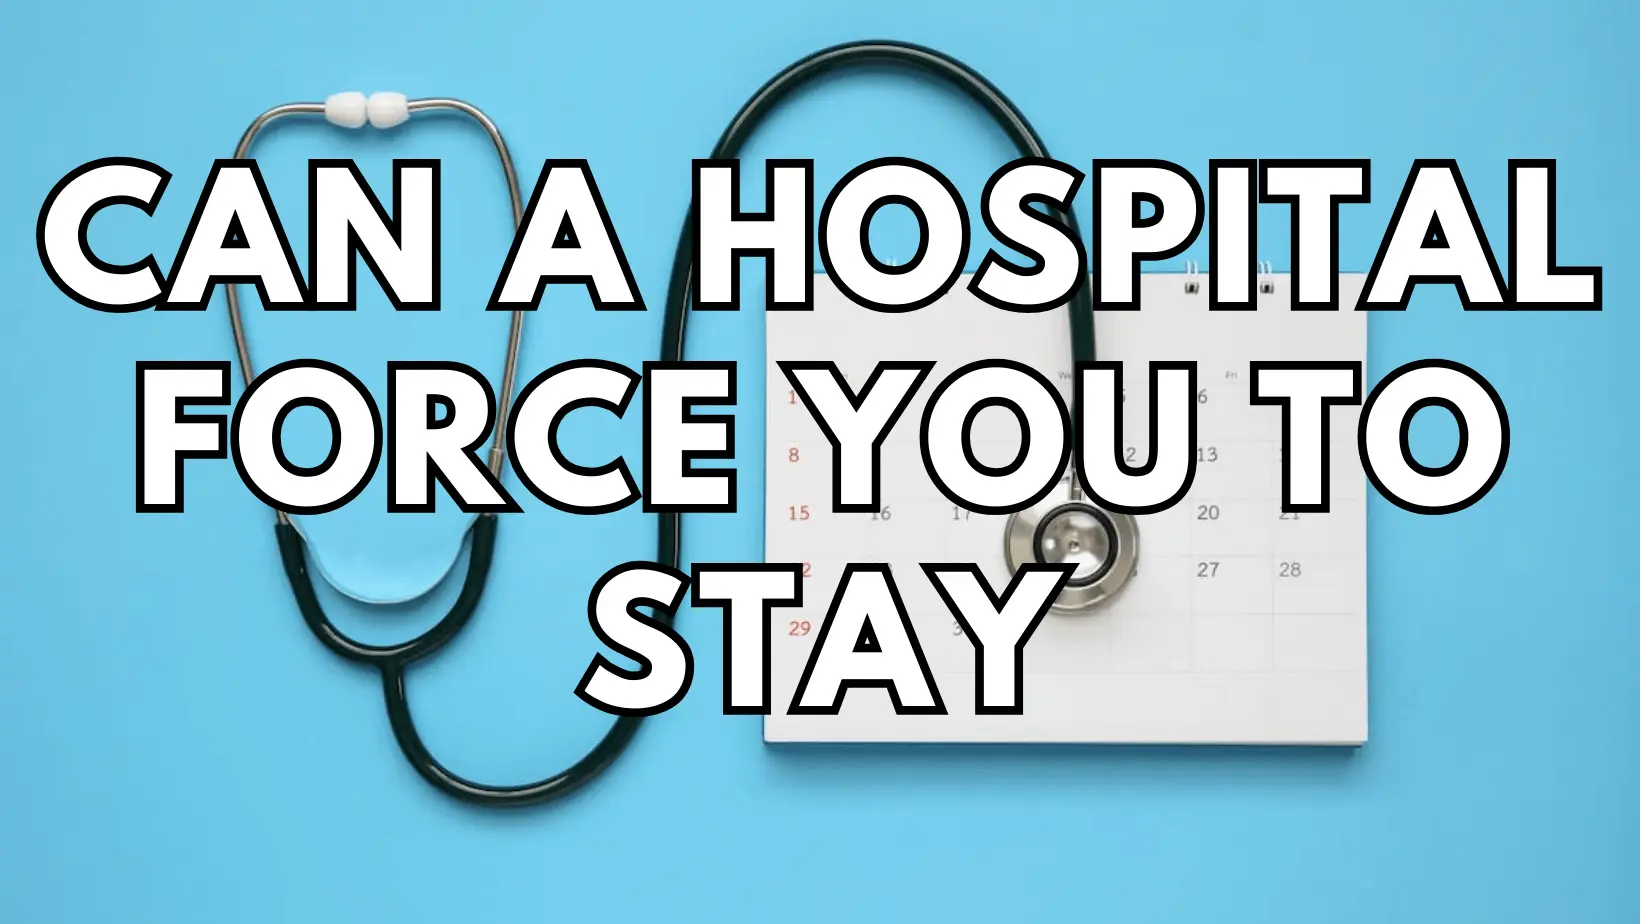 Can a Hospital Force You to Stay featured image